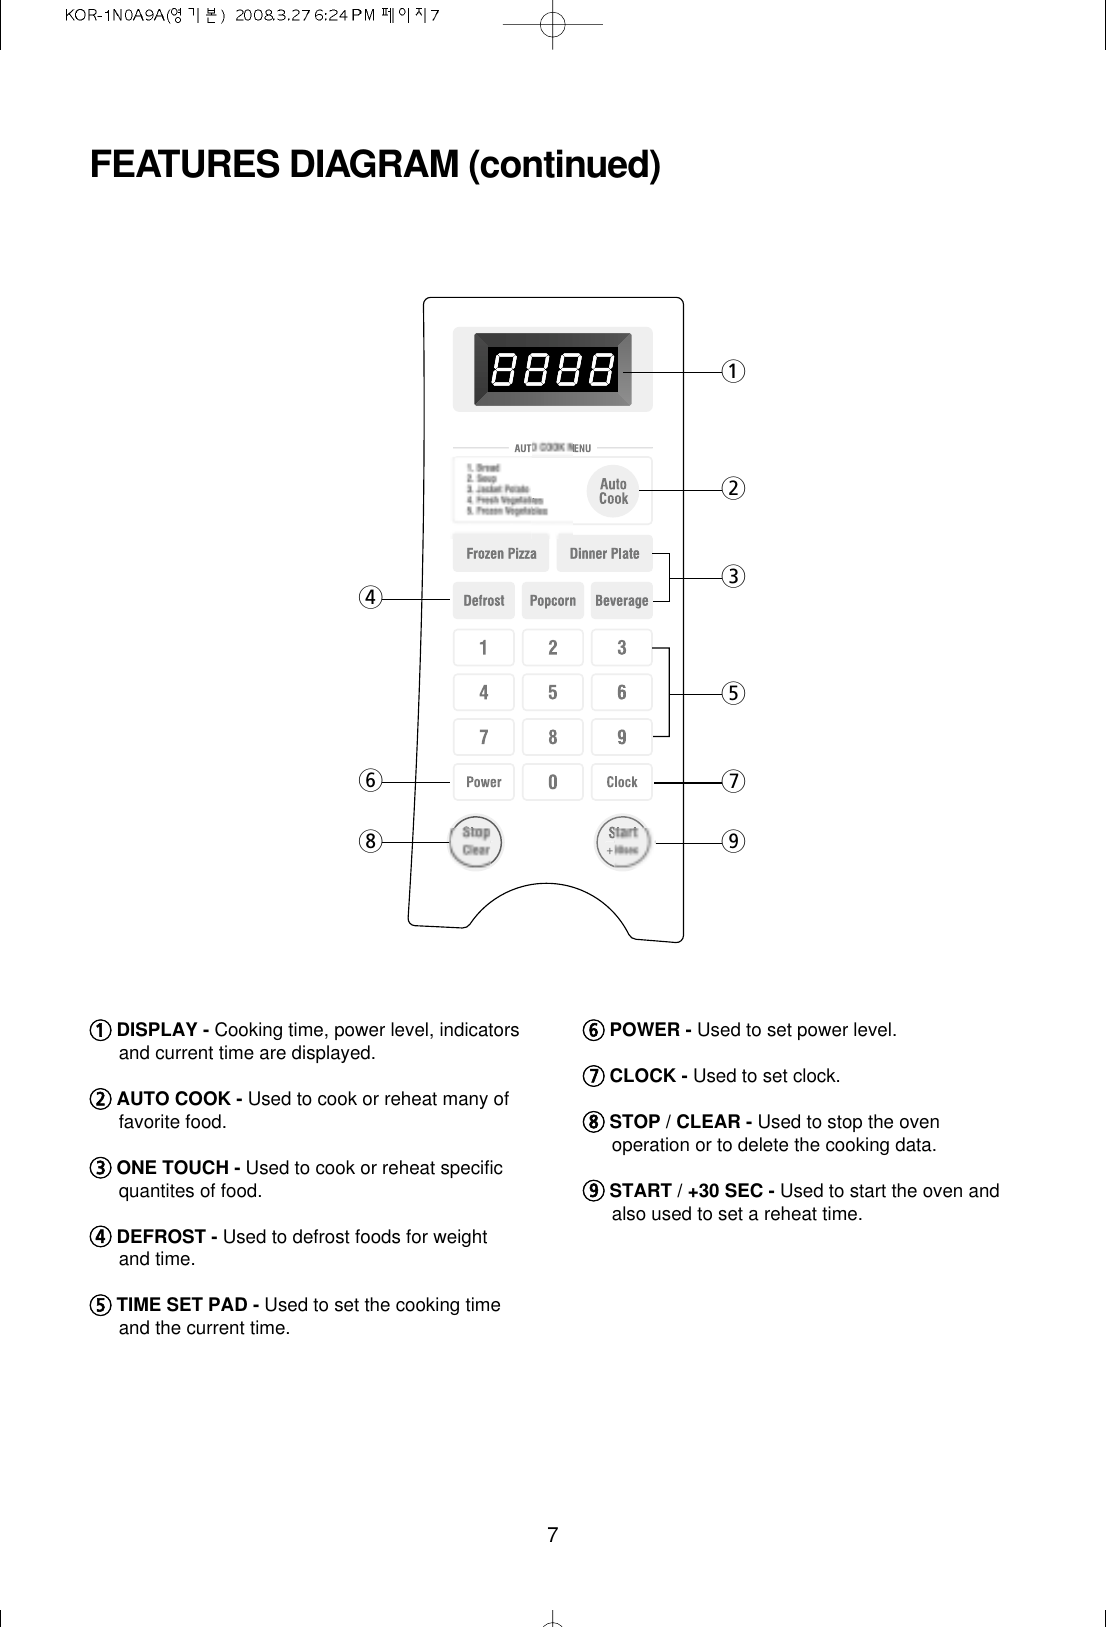 71DISPLAY - Cooking time, power level, indicatorsand current time are displayed.2AUTO COOK - Used to cook or reheat many offavorite food.3ONE TOUCH - Used to cook or reheat specificquantites of food.4DEFROST - Used to defrost foods for weightand time.5TIME SET PAD - Used to set the cooking timeand the current time.6POWER - Used to set power level.7CLOCK - Used to set clock.8STOP / CLEAR - Used to stop the ovenoperation or to delete the cooking data.9START / +30 SEC - Used to start the oven andalso used to set a reheat time.FEATURES DIAGRAM (continued)127986435